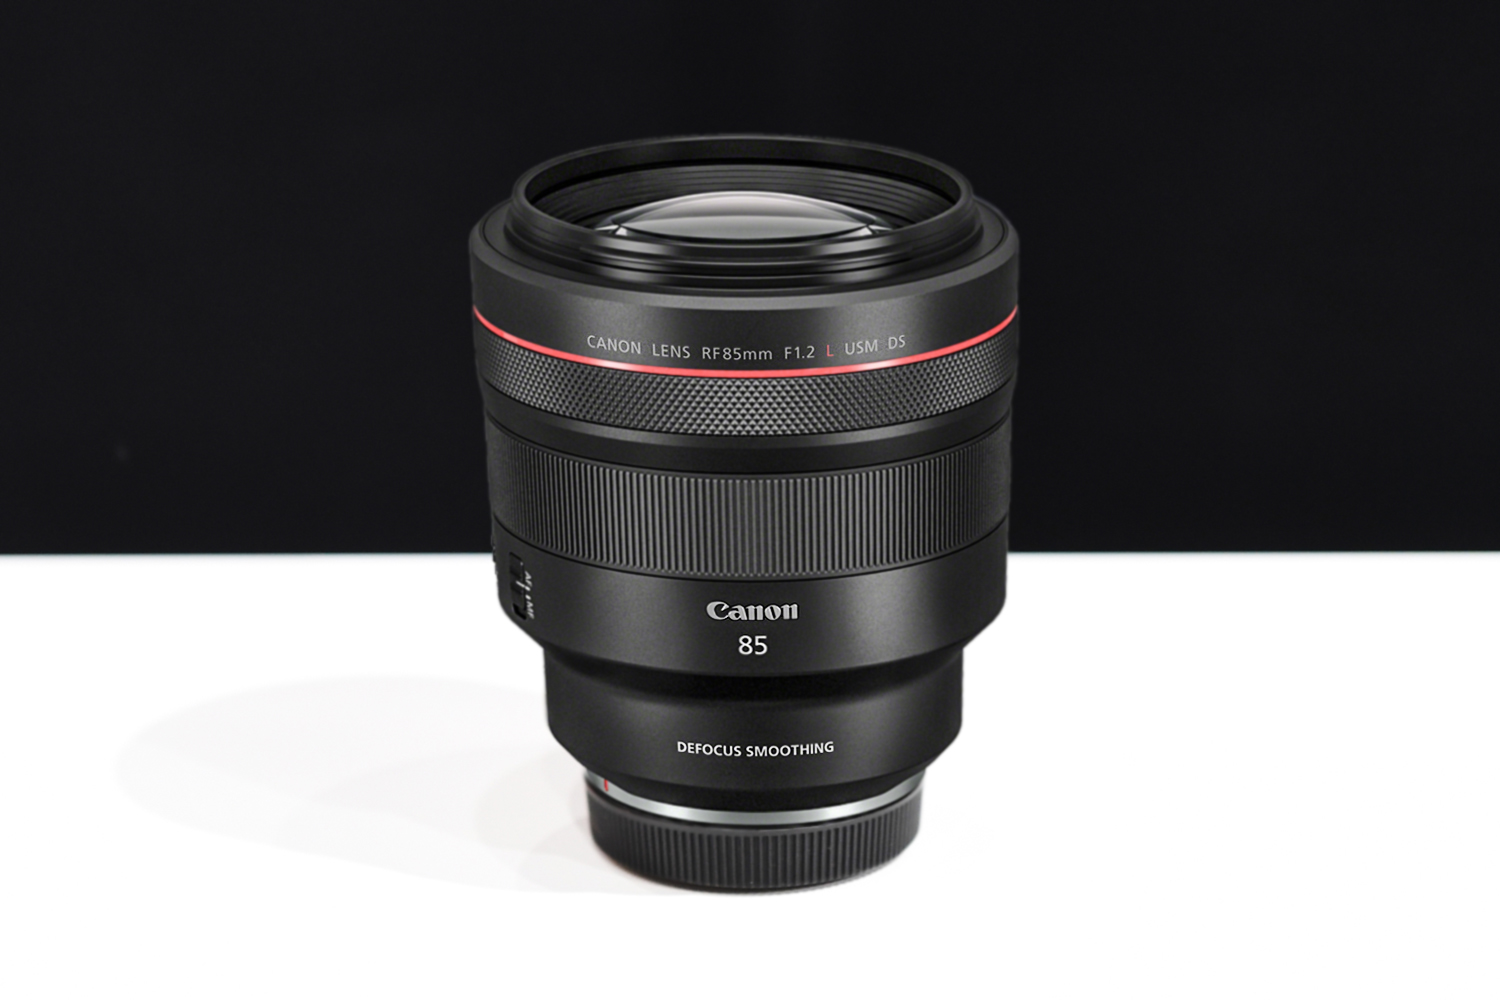 Canon RF 85mm f/1.2L USM DS first look: 